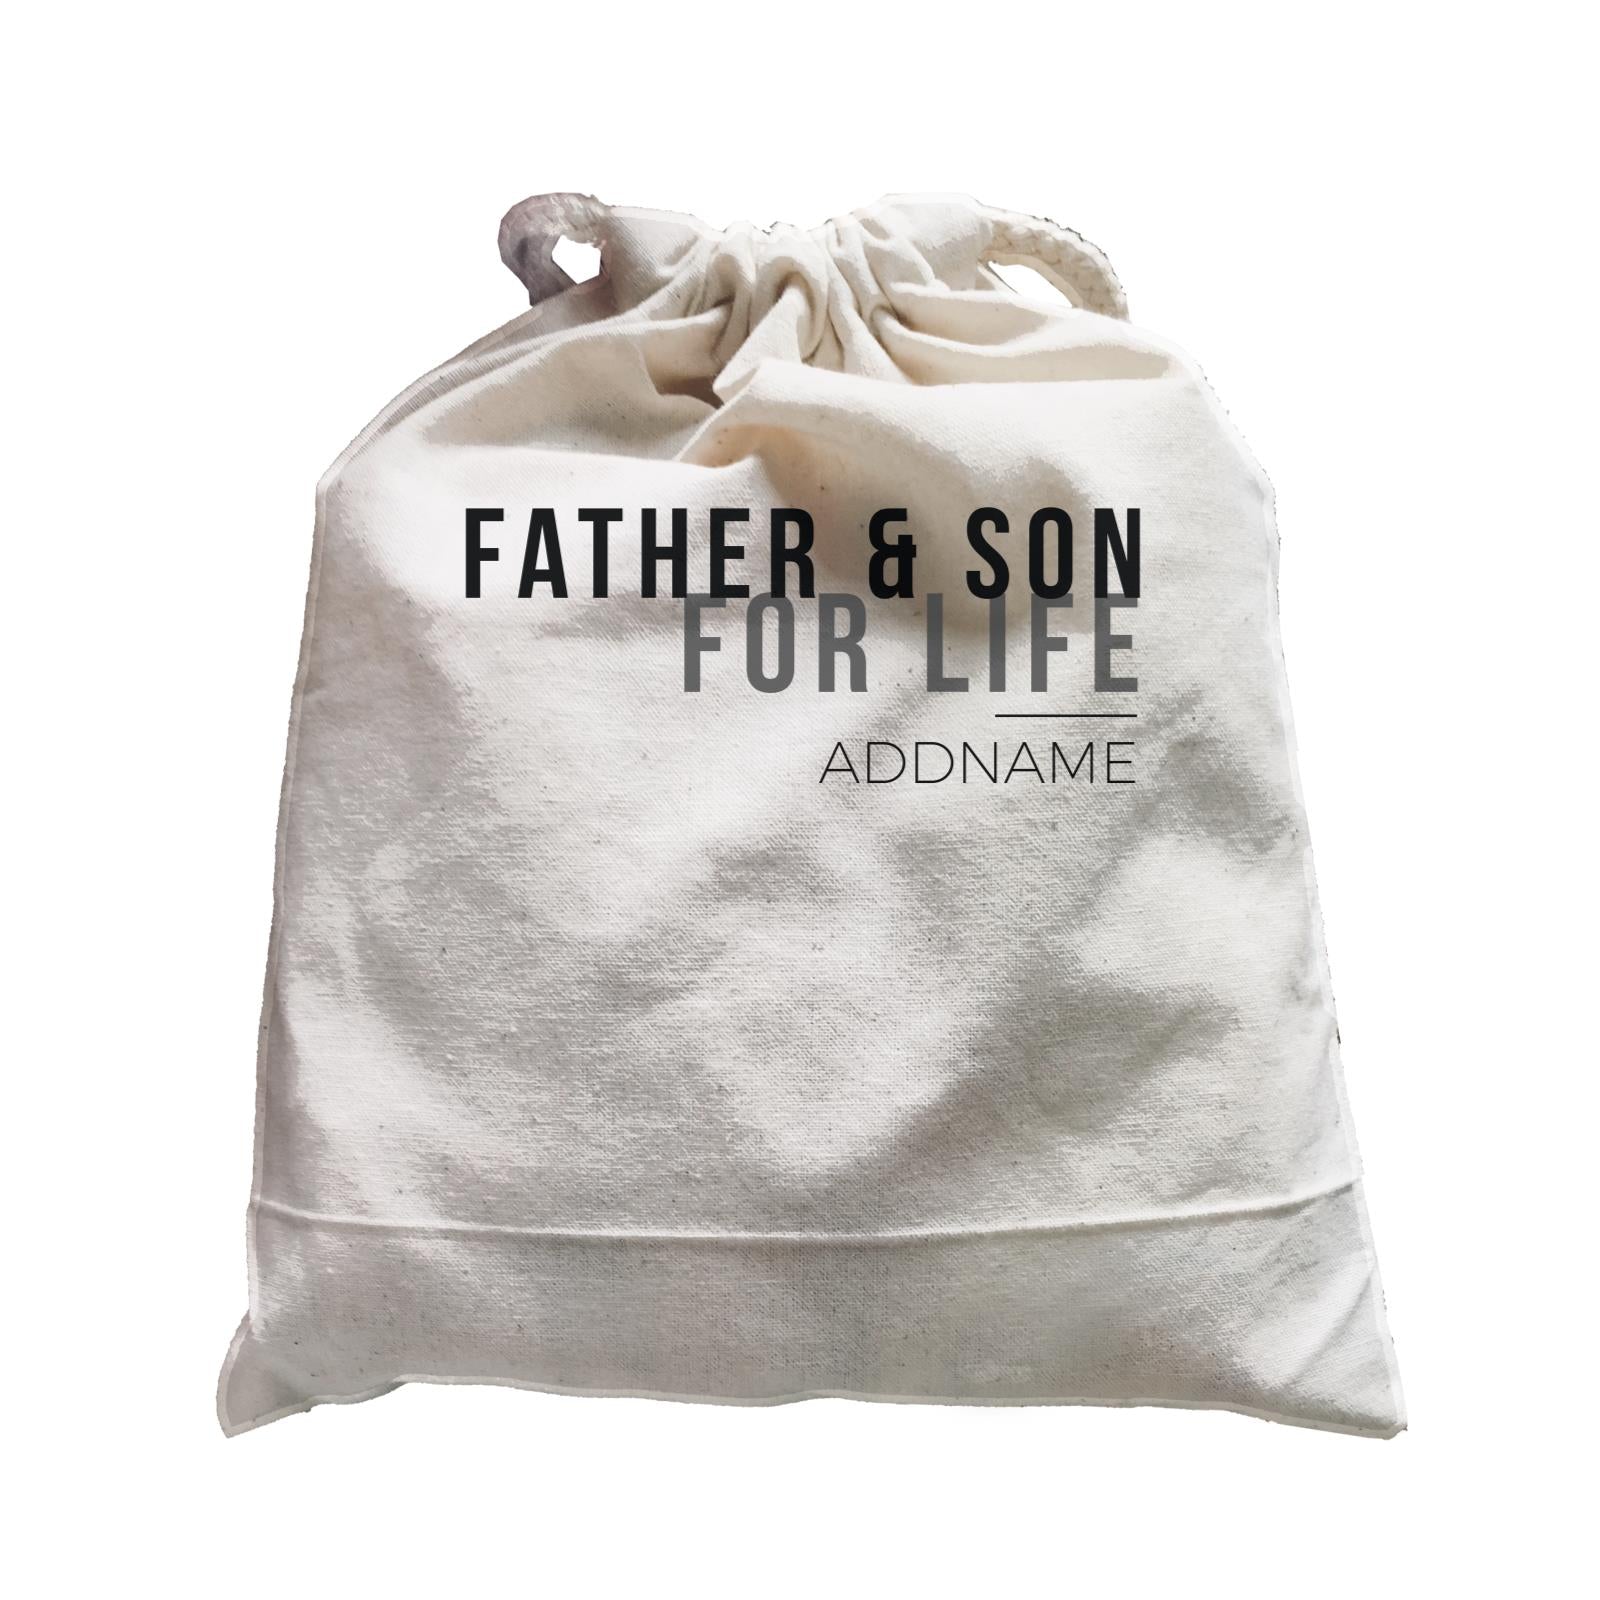 Family For Life Father & Son For Life Addname Satchel